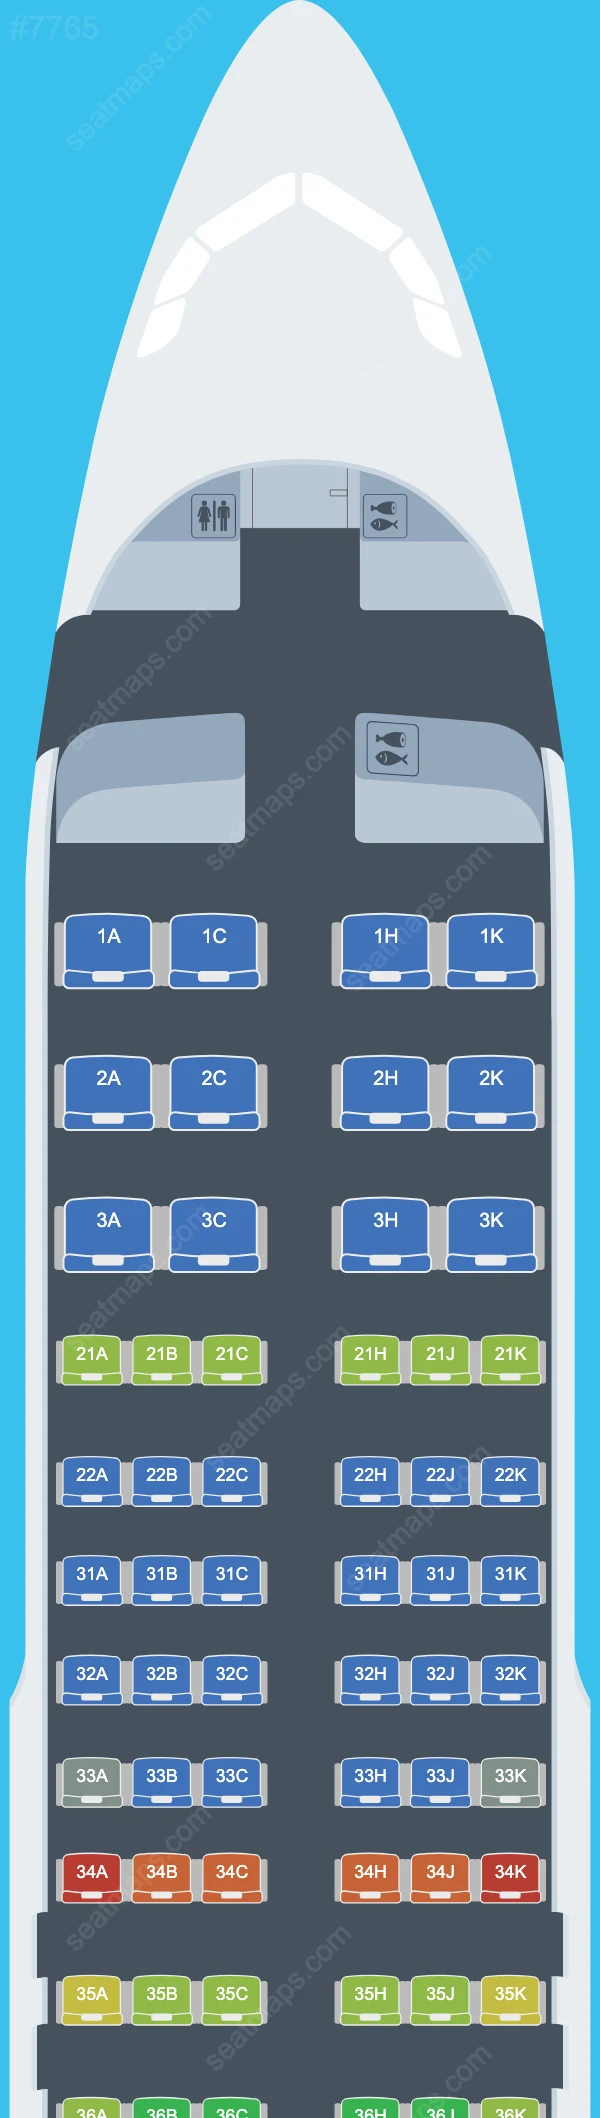 Philippine Airlines (PAL) Airbus A320 Seat Maps A320-200